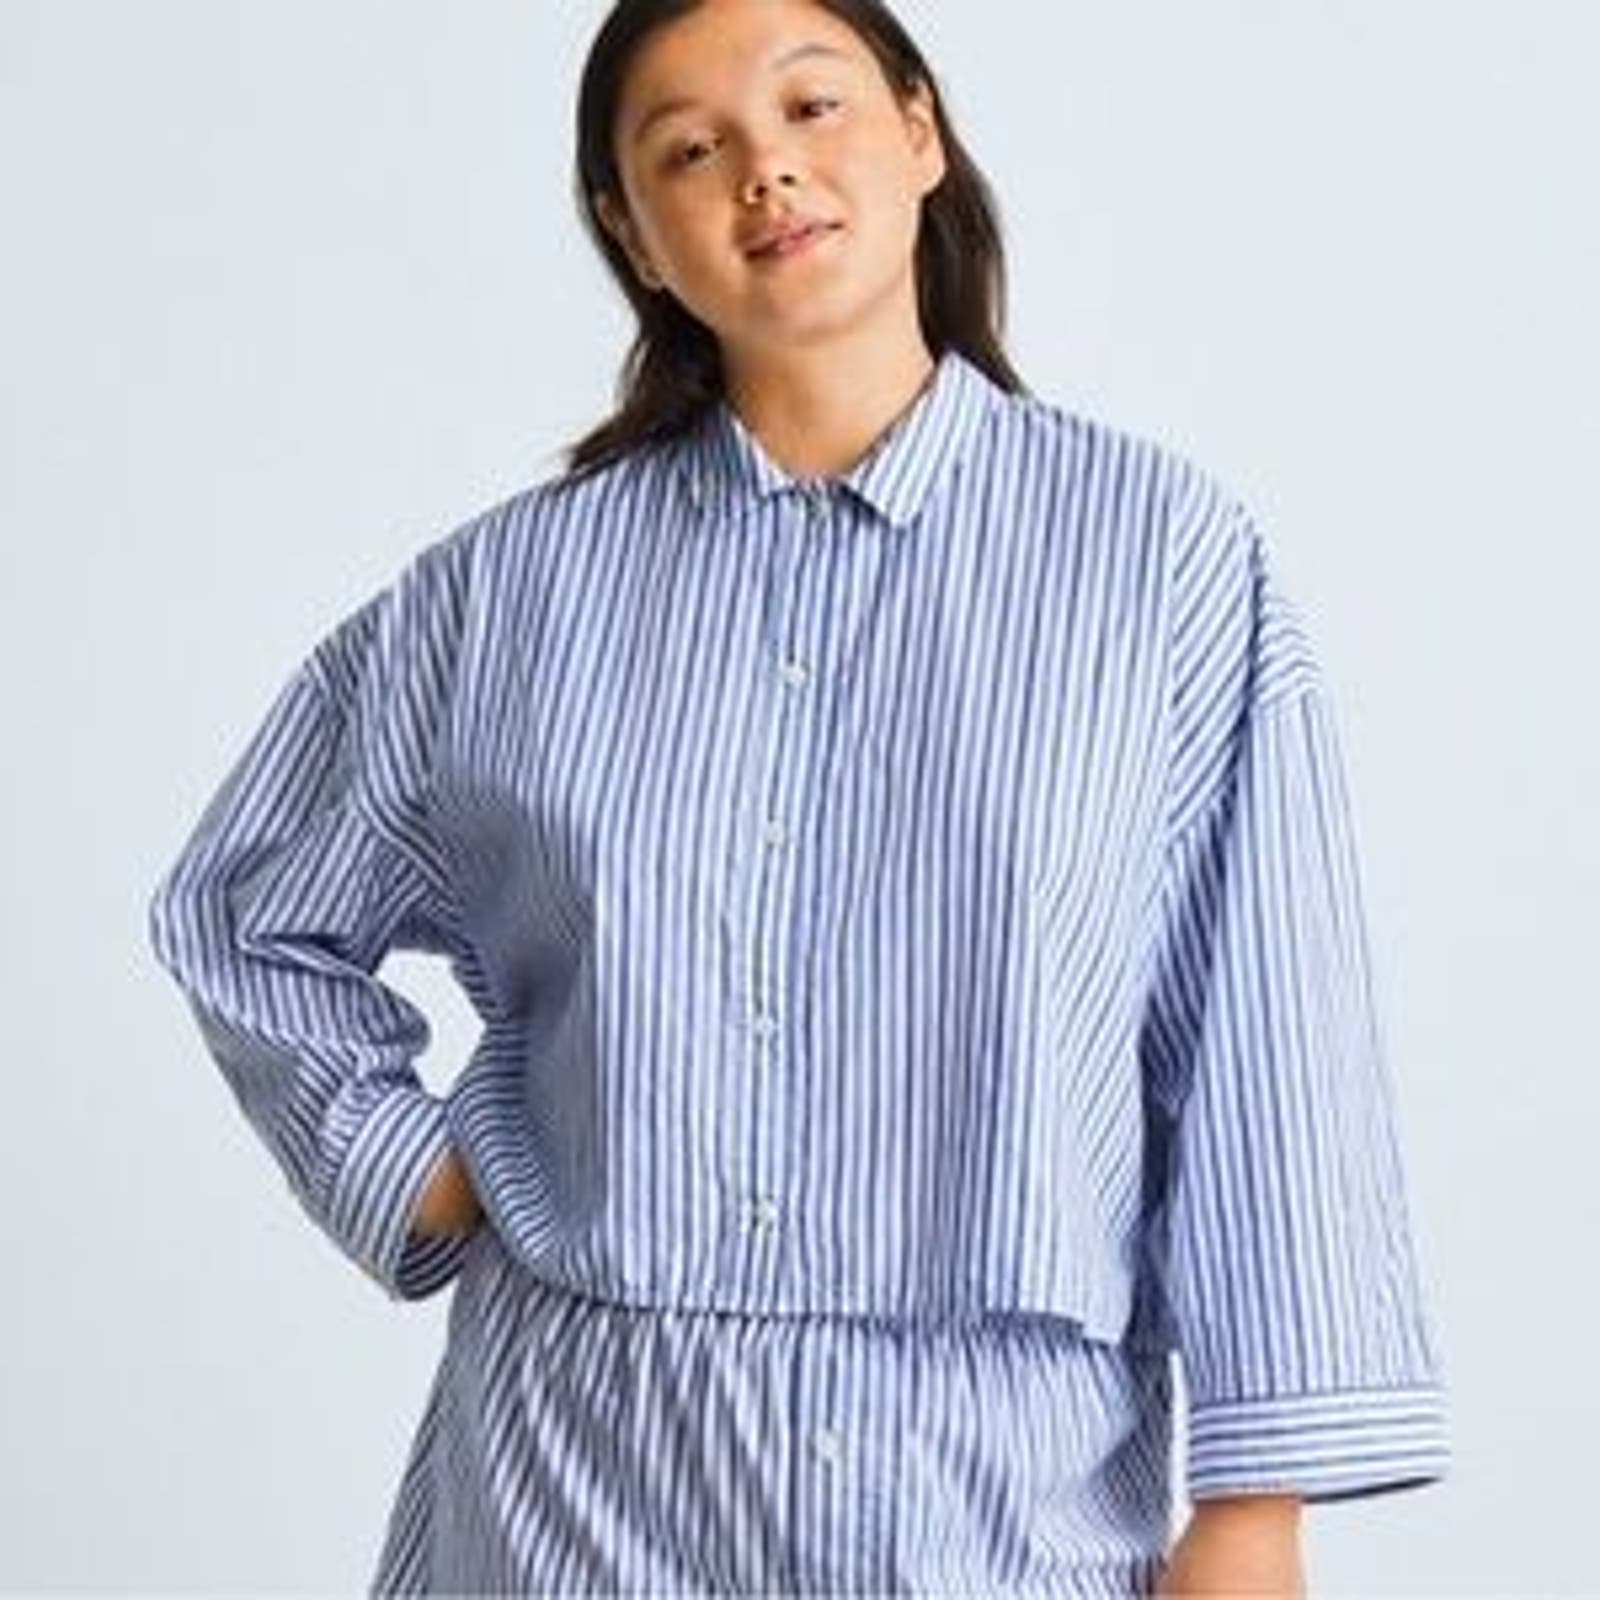 Everlane NWT The Woven P.J. Longsleeve Button Front Striped Top Blue White SZ XS